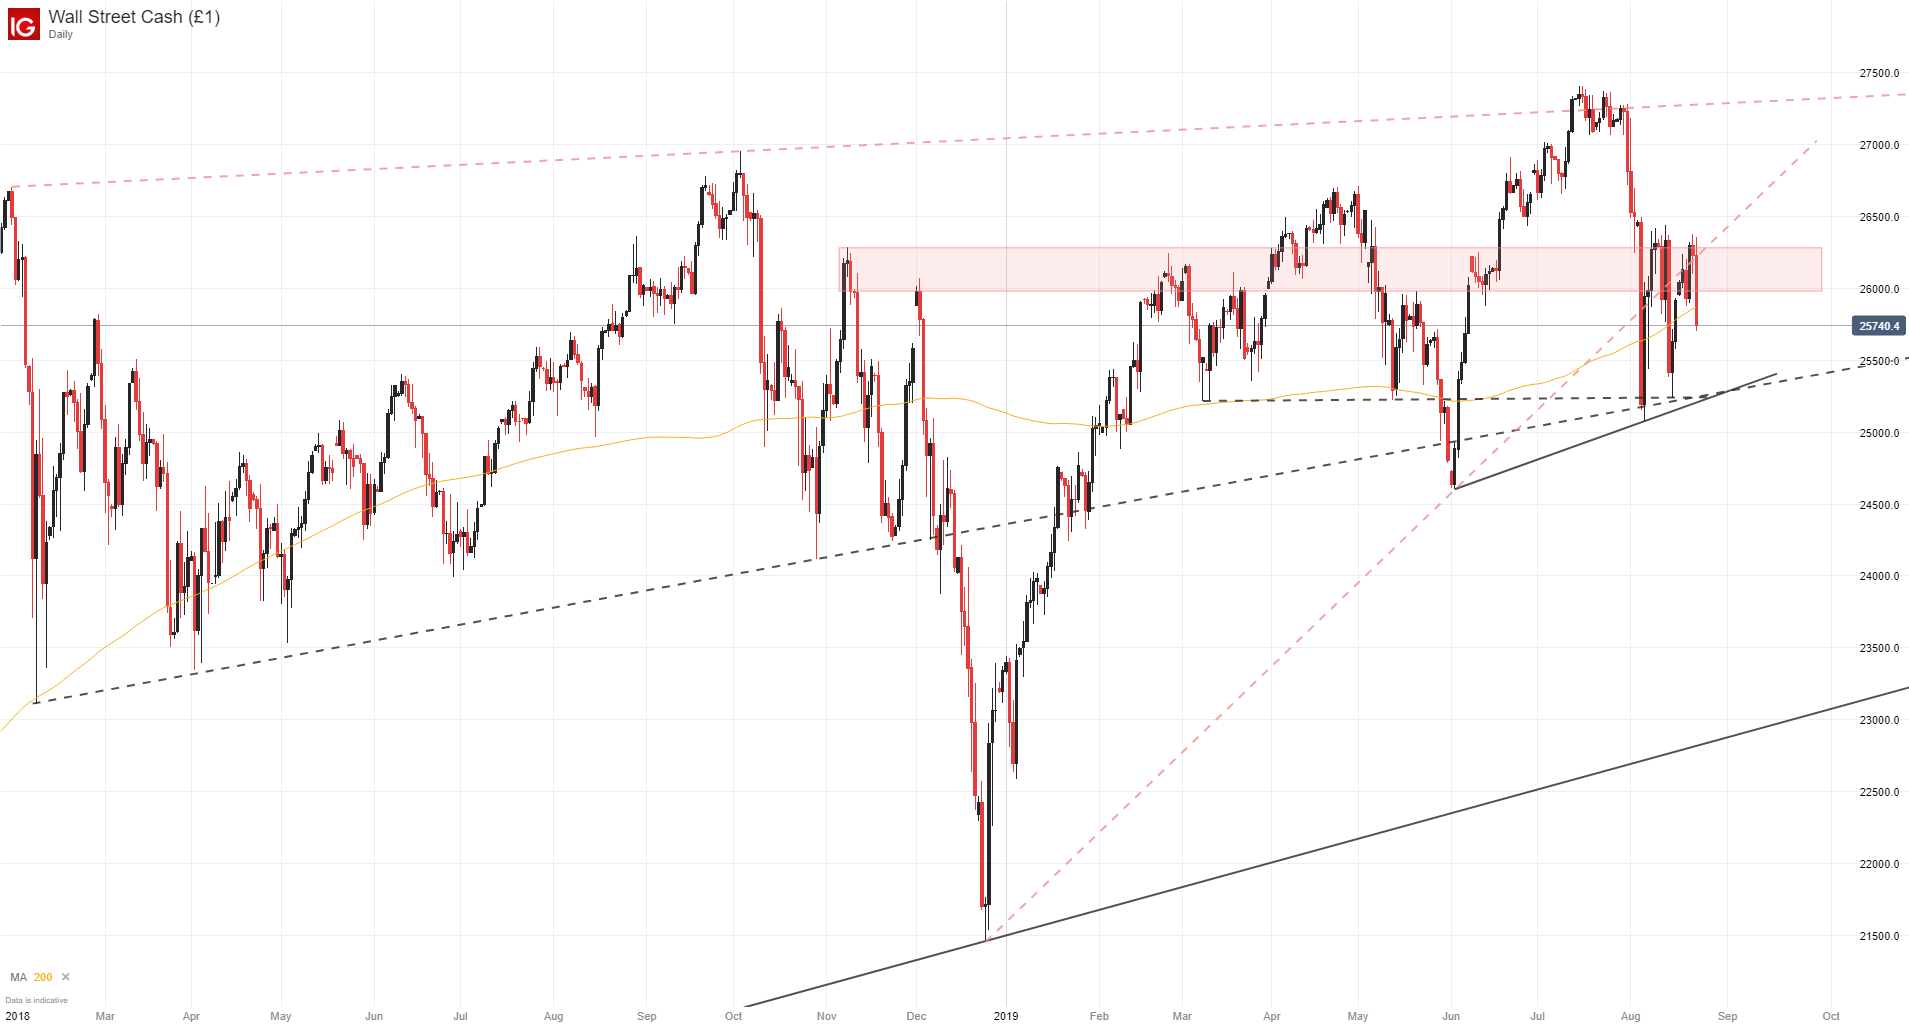 dow now cortiva